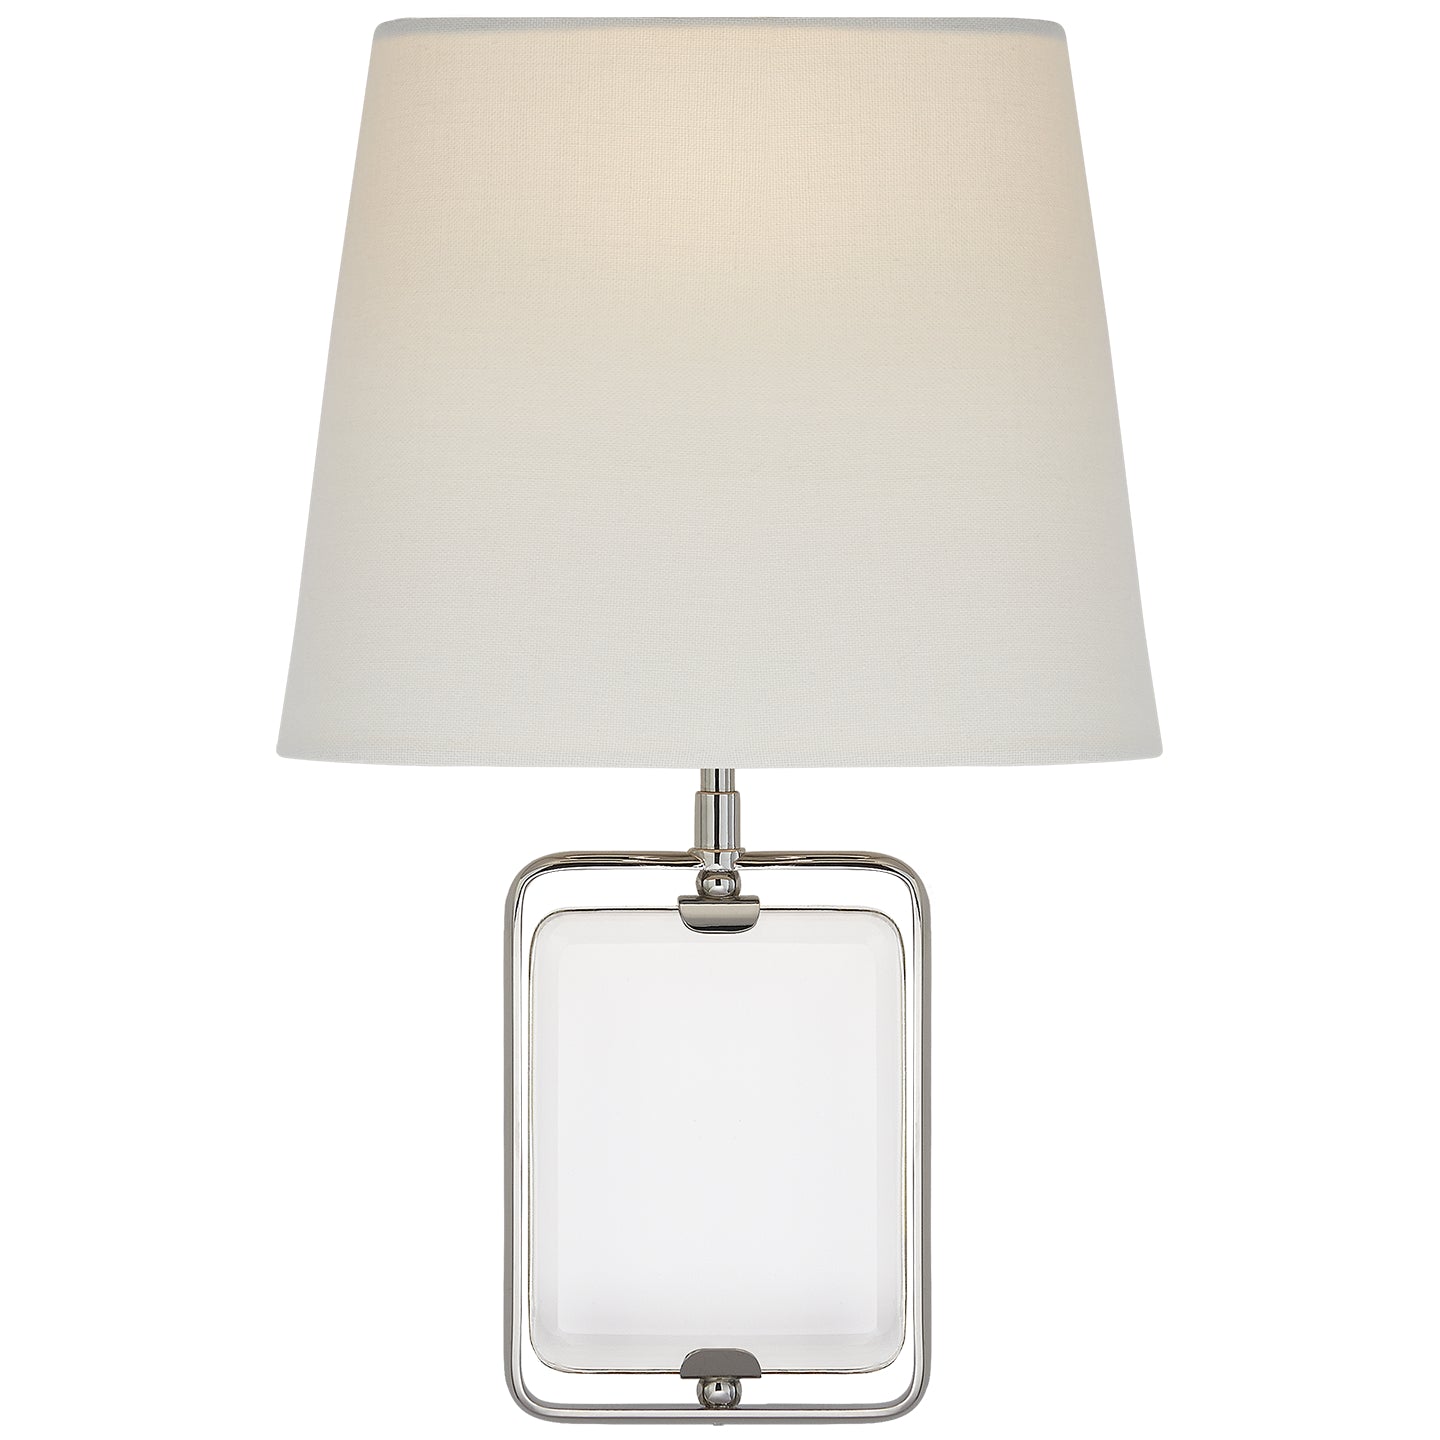 Visual Comfort Signature - SK 2030CG/PN-L - One Light Wall Sconce - Henri - Crystal and Polished Nickel